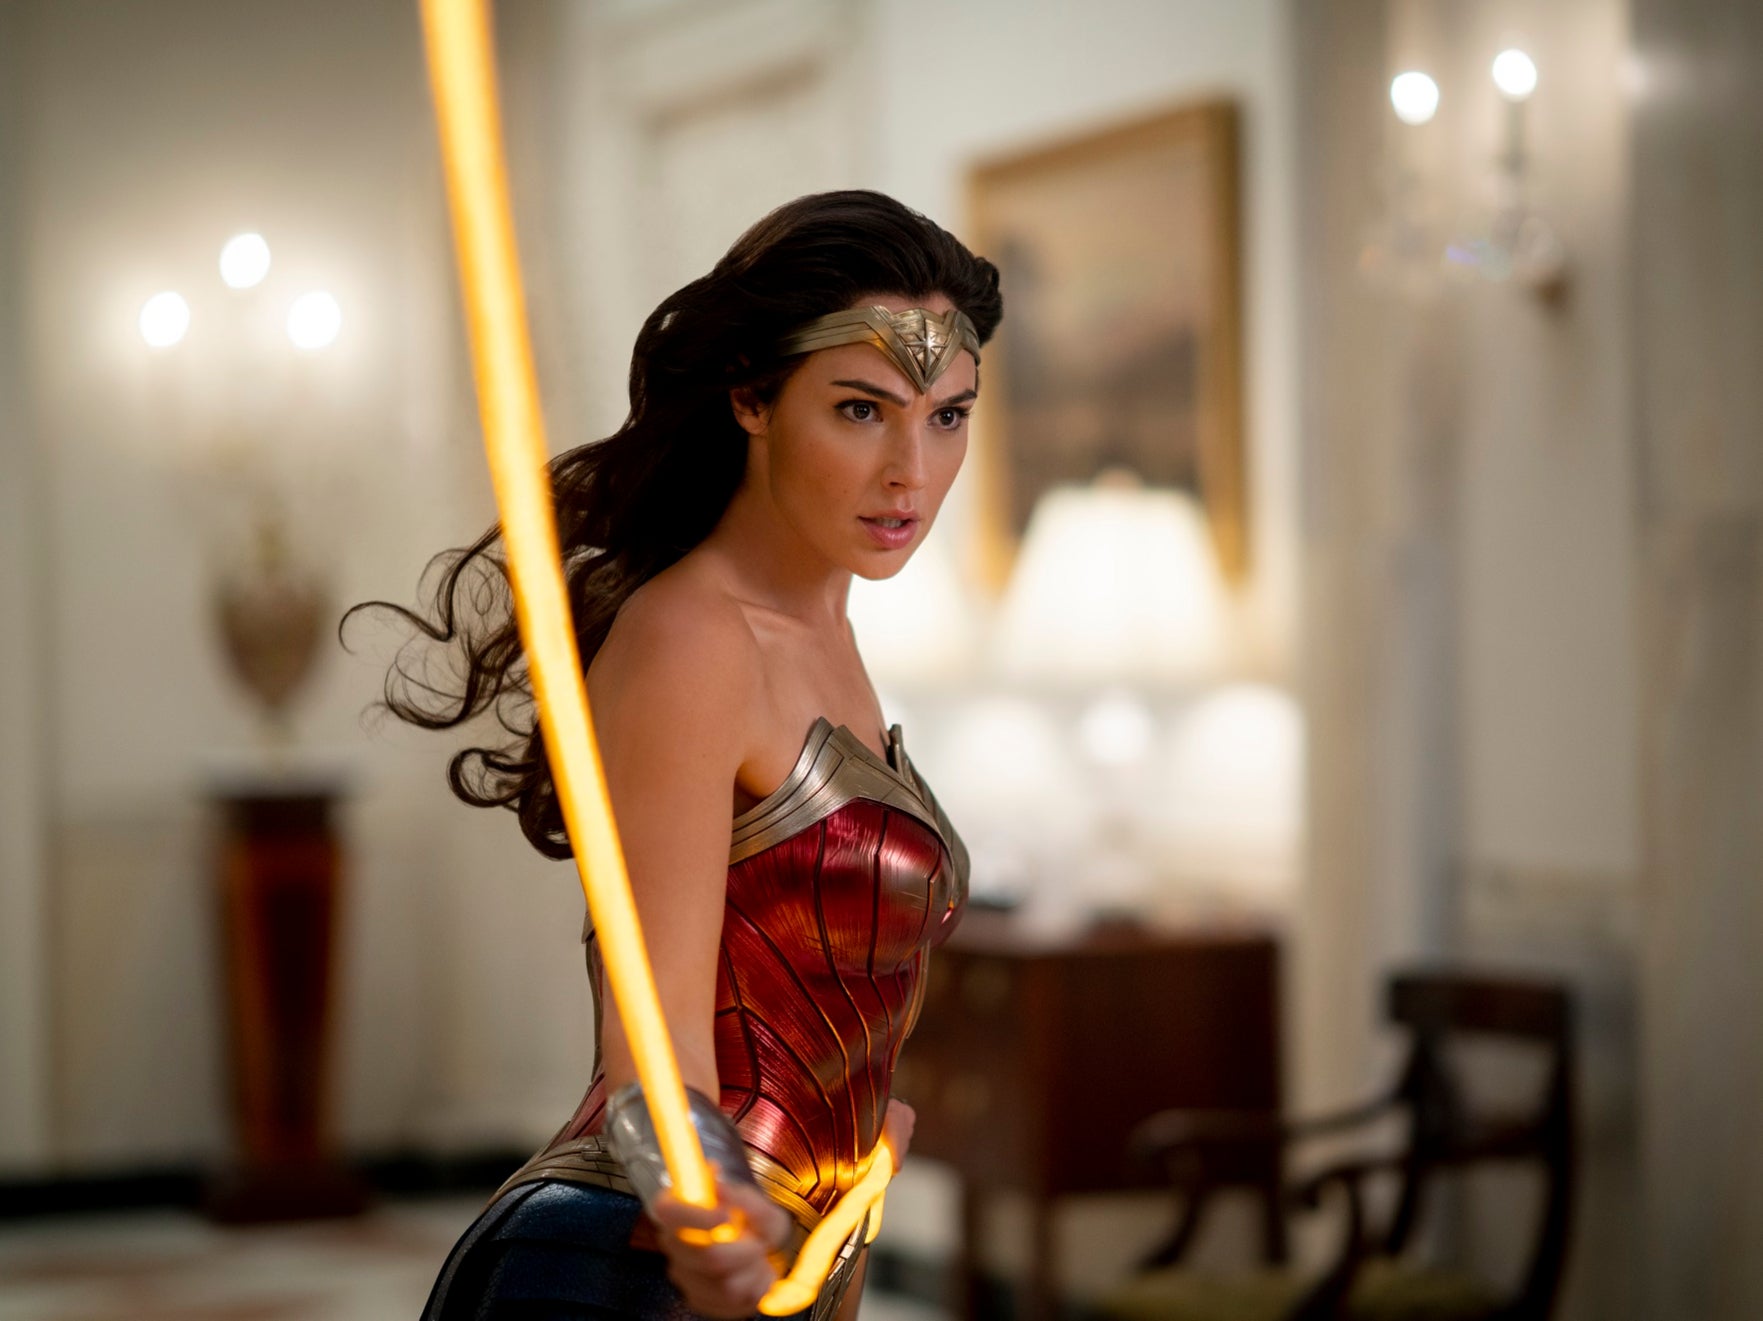 Gal Gadot playing Wonder Woman has highlighted that women around the world have faced extra pressure this year